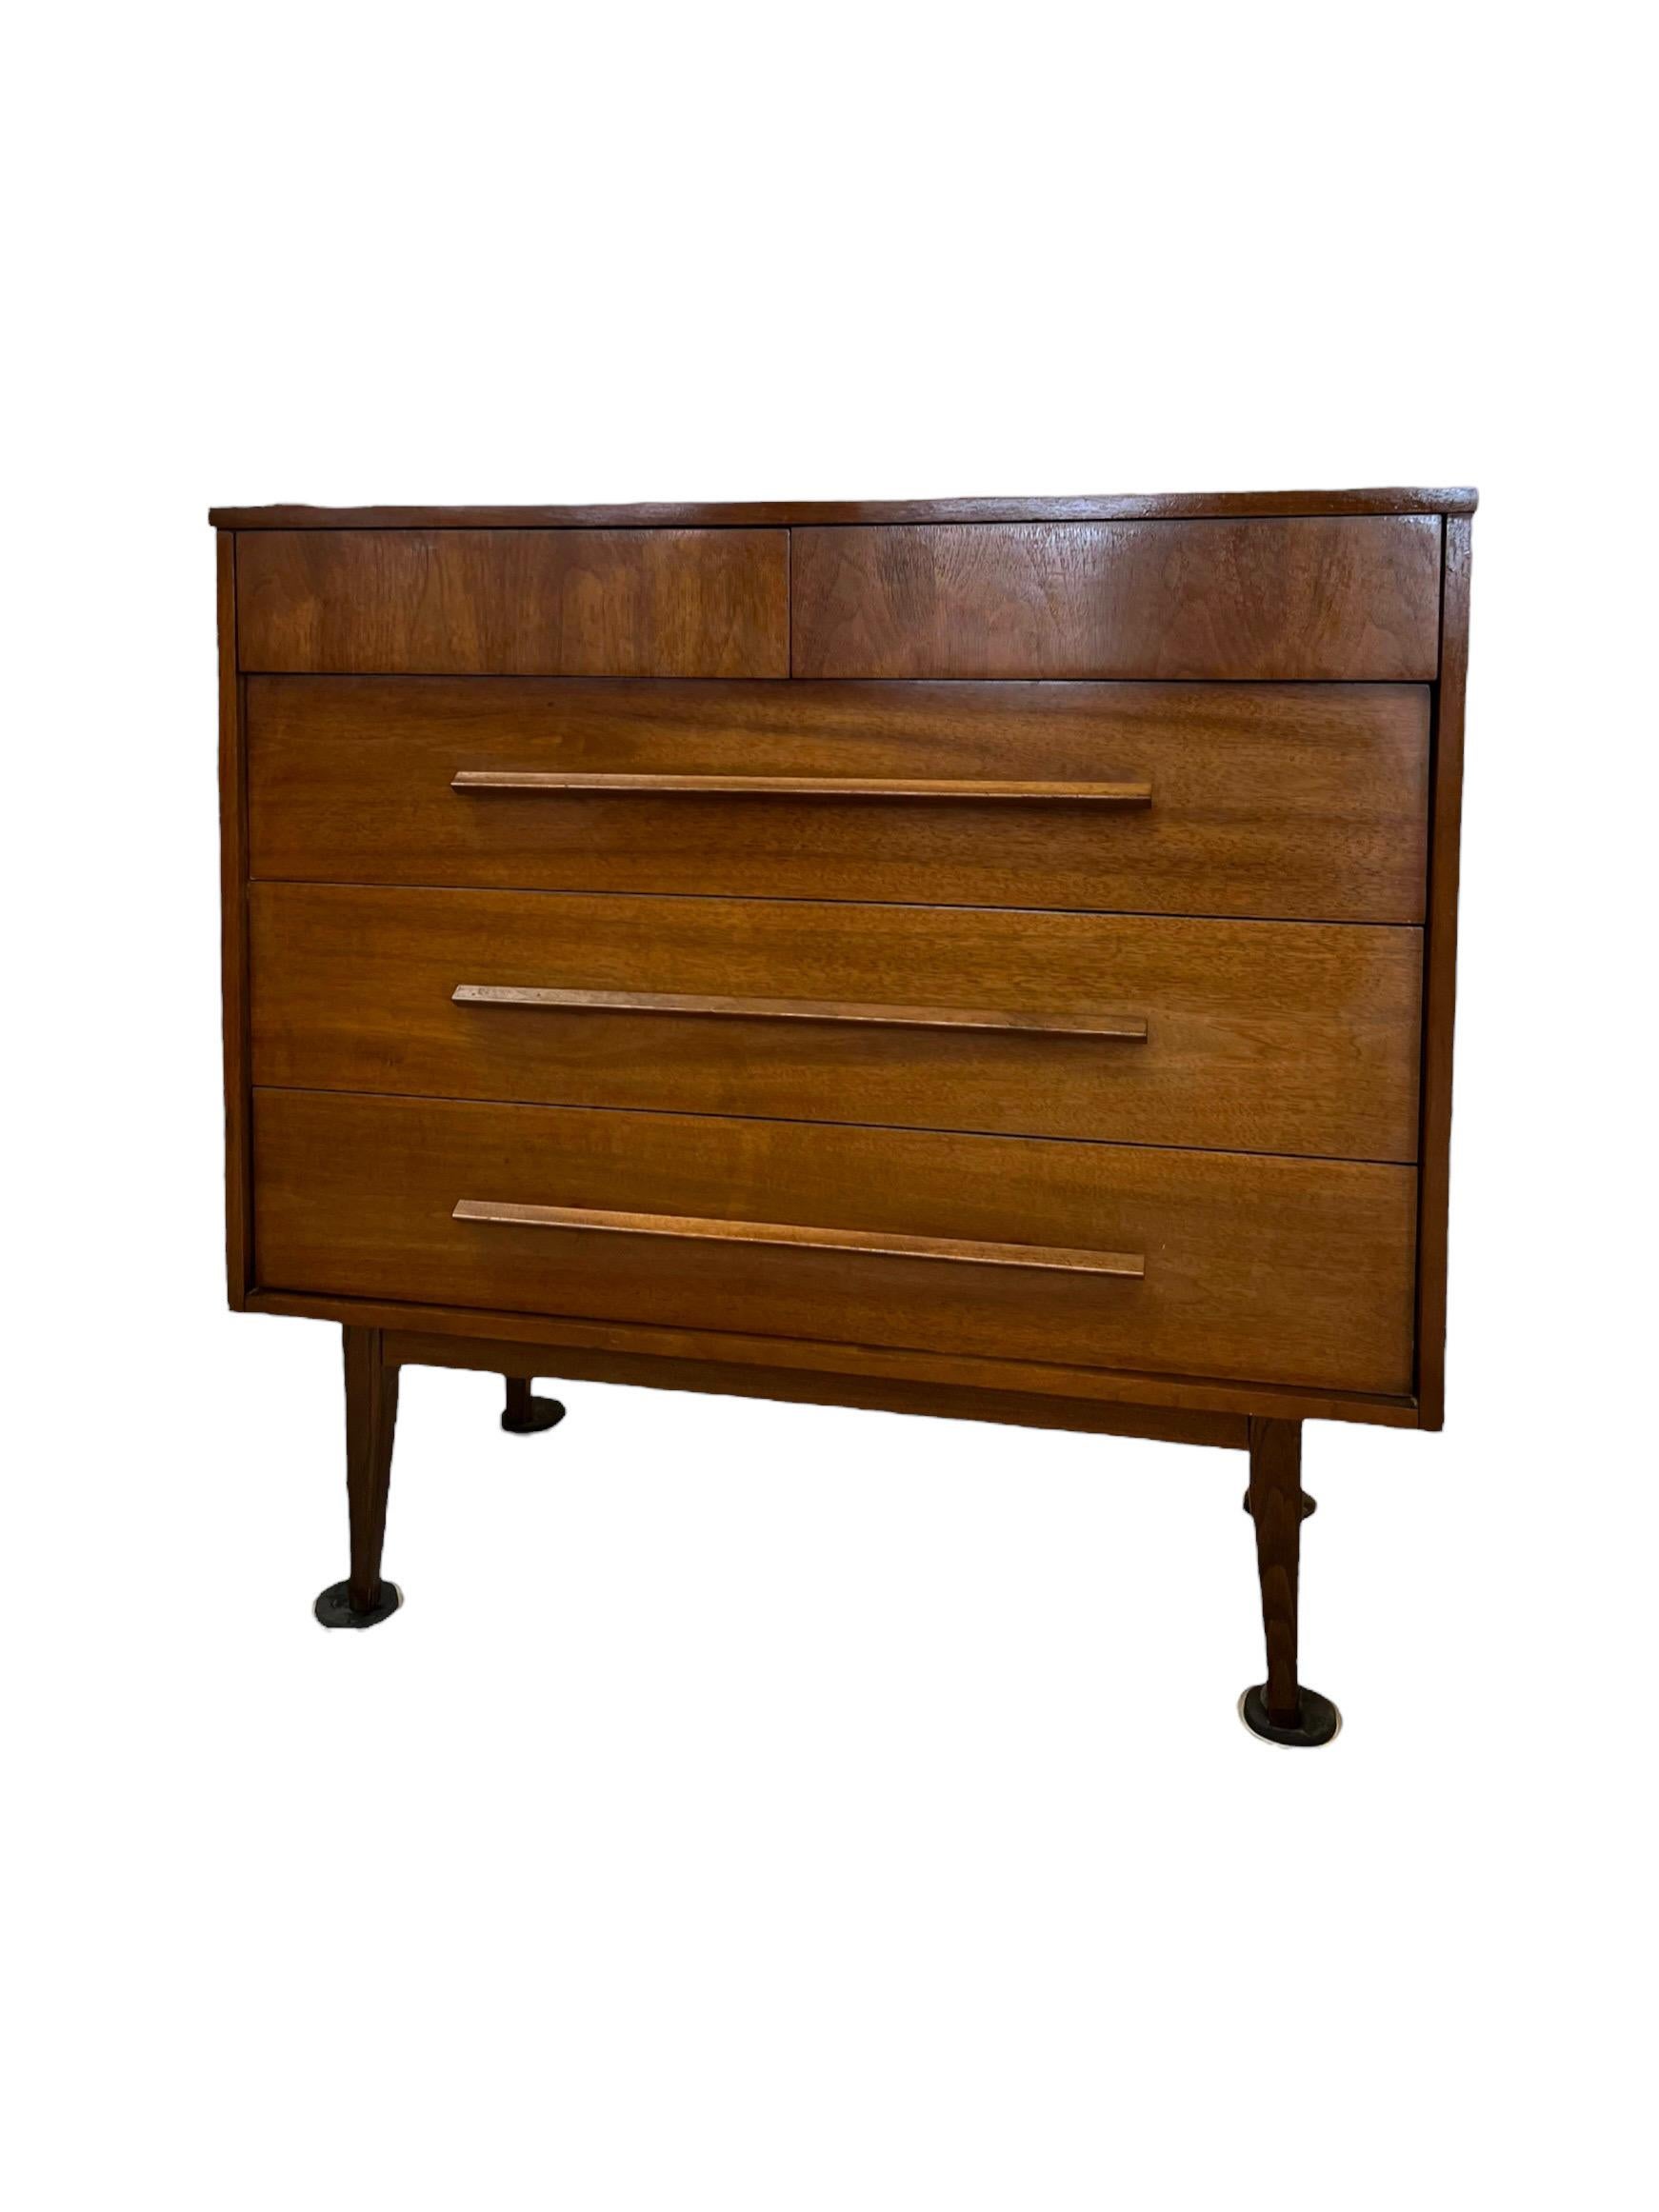 A nice dark cherry mid century dresser with two smaller upper drawers and three larger lower drawers with matching long streamline solid wood pull handles. A very clean design that works well with many different decors having plenty of storage and